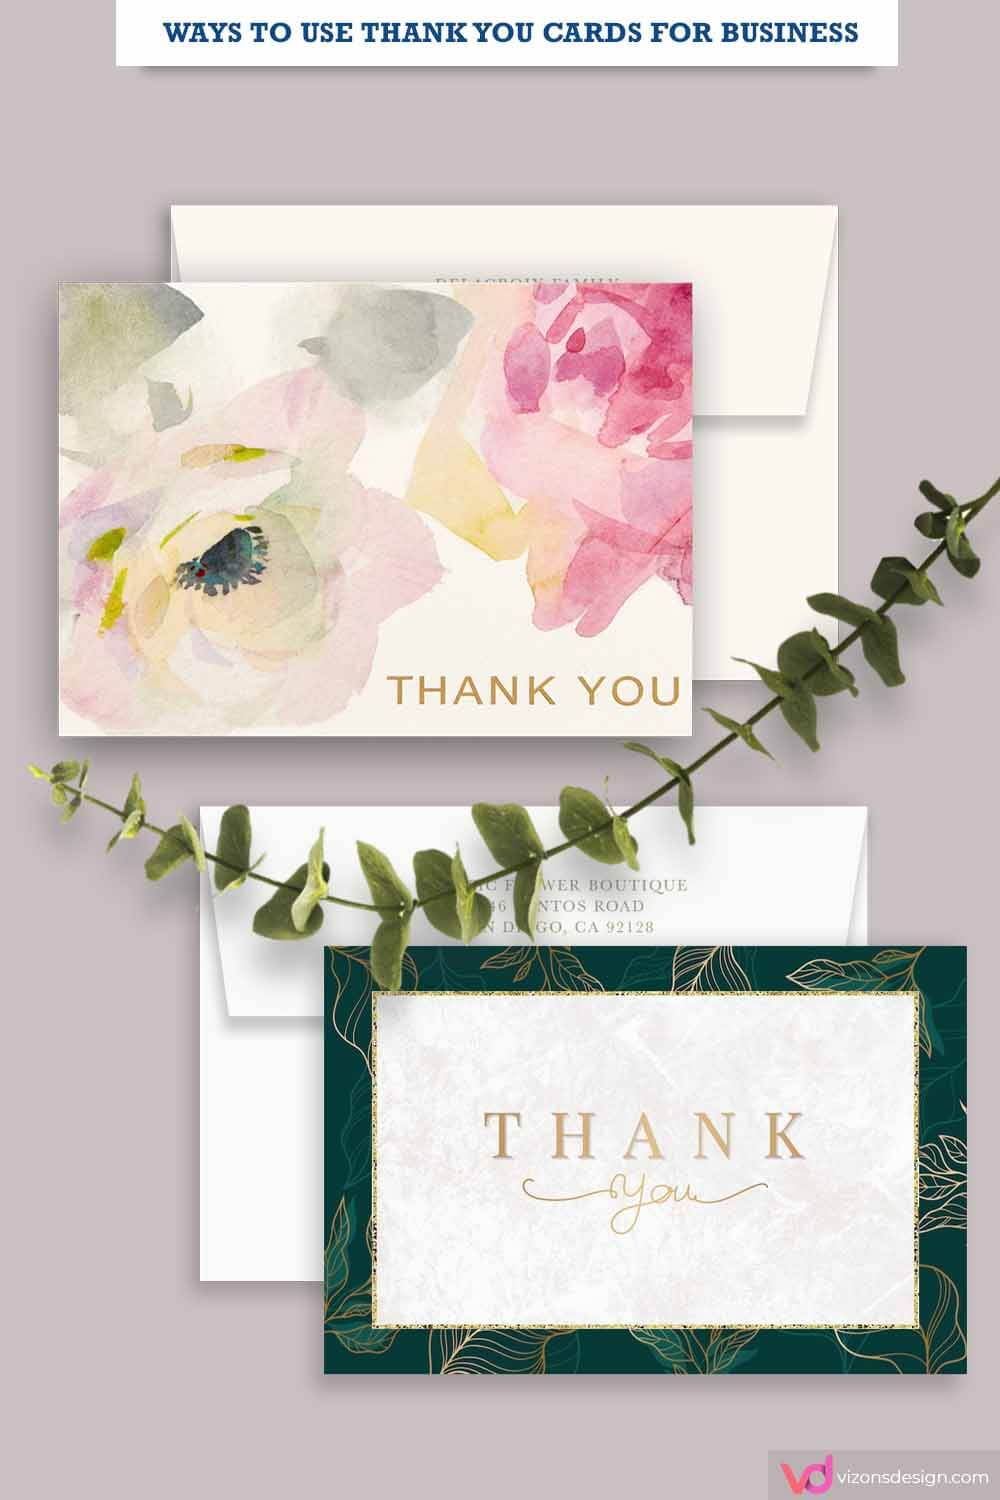 Ways To Use Thank You Cards For Business